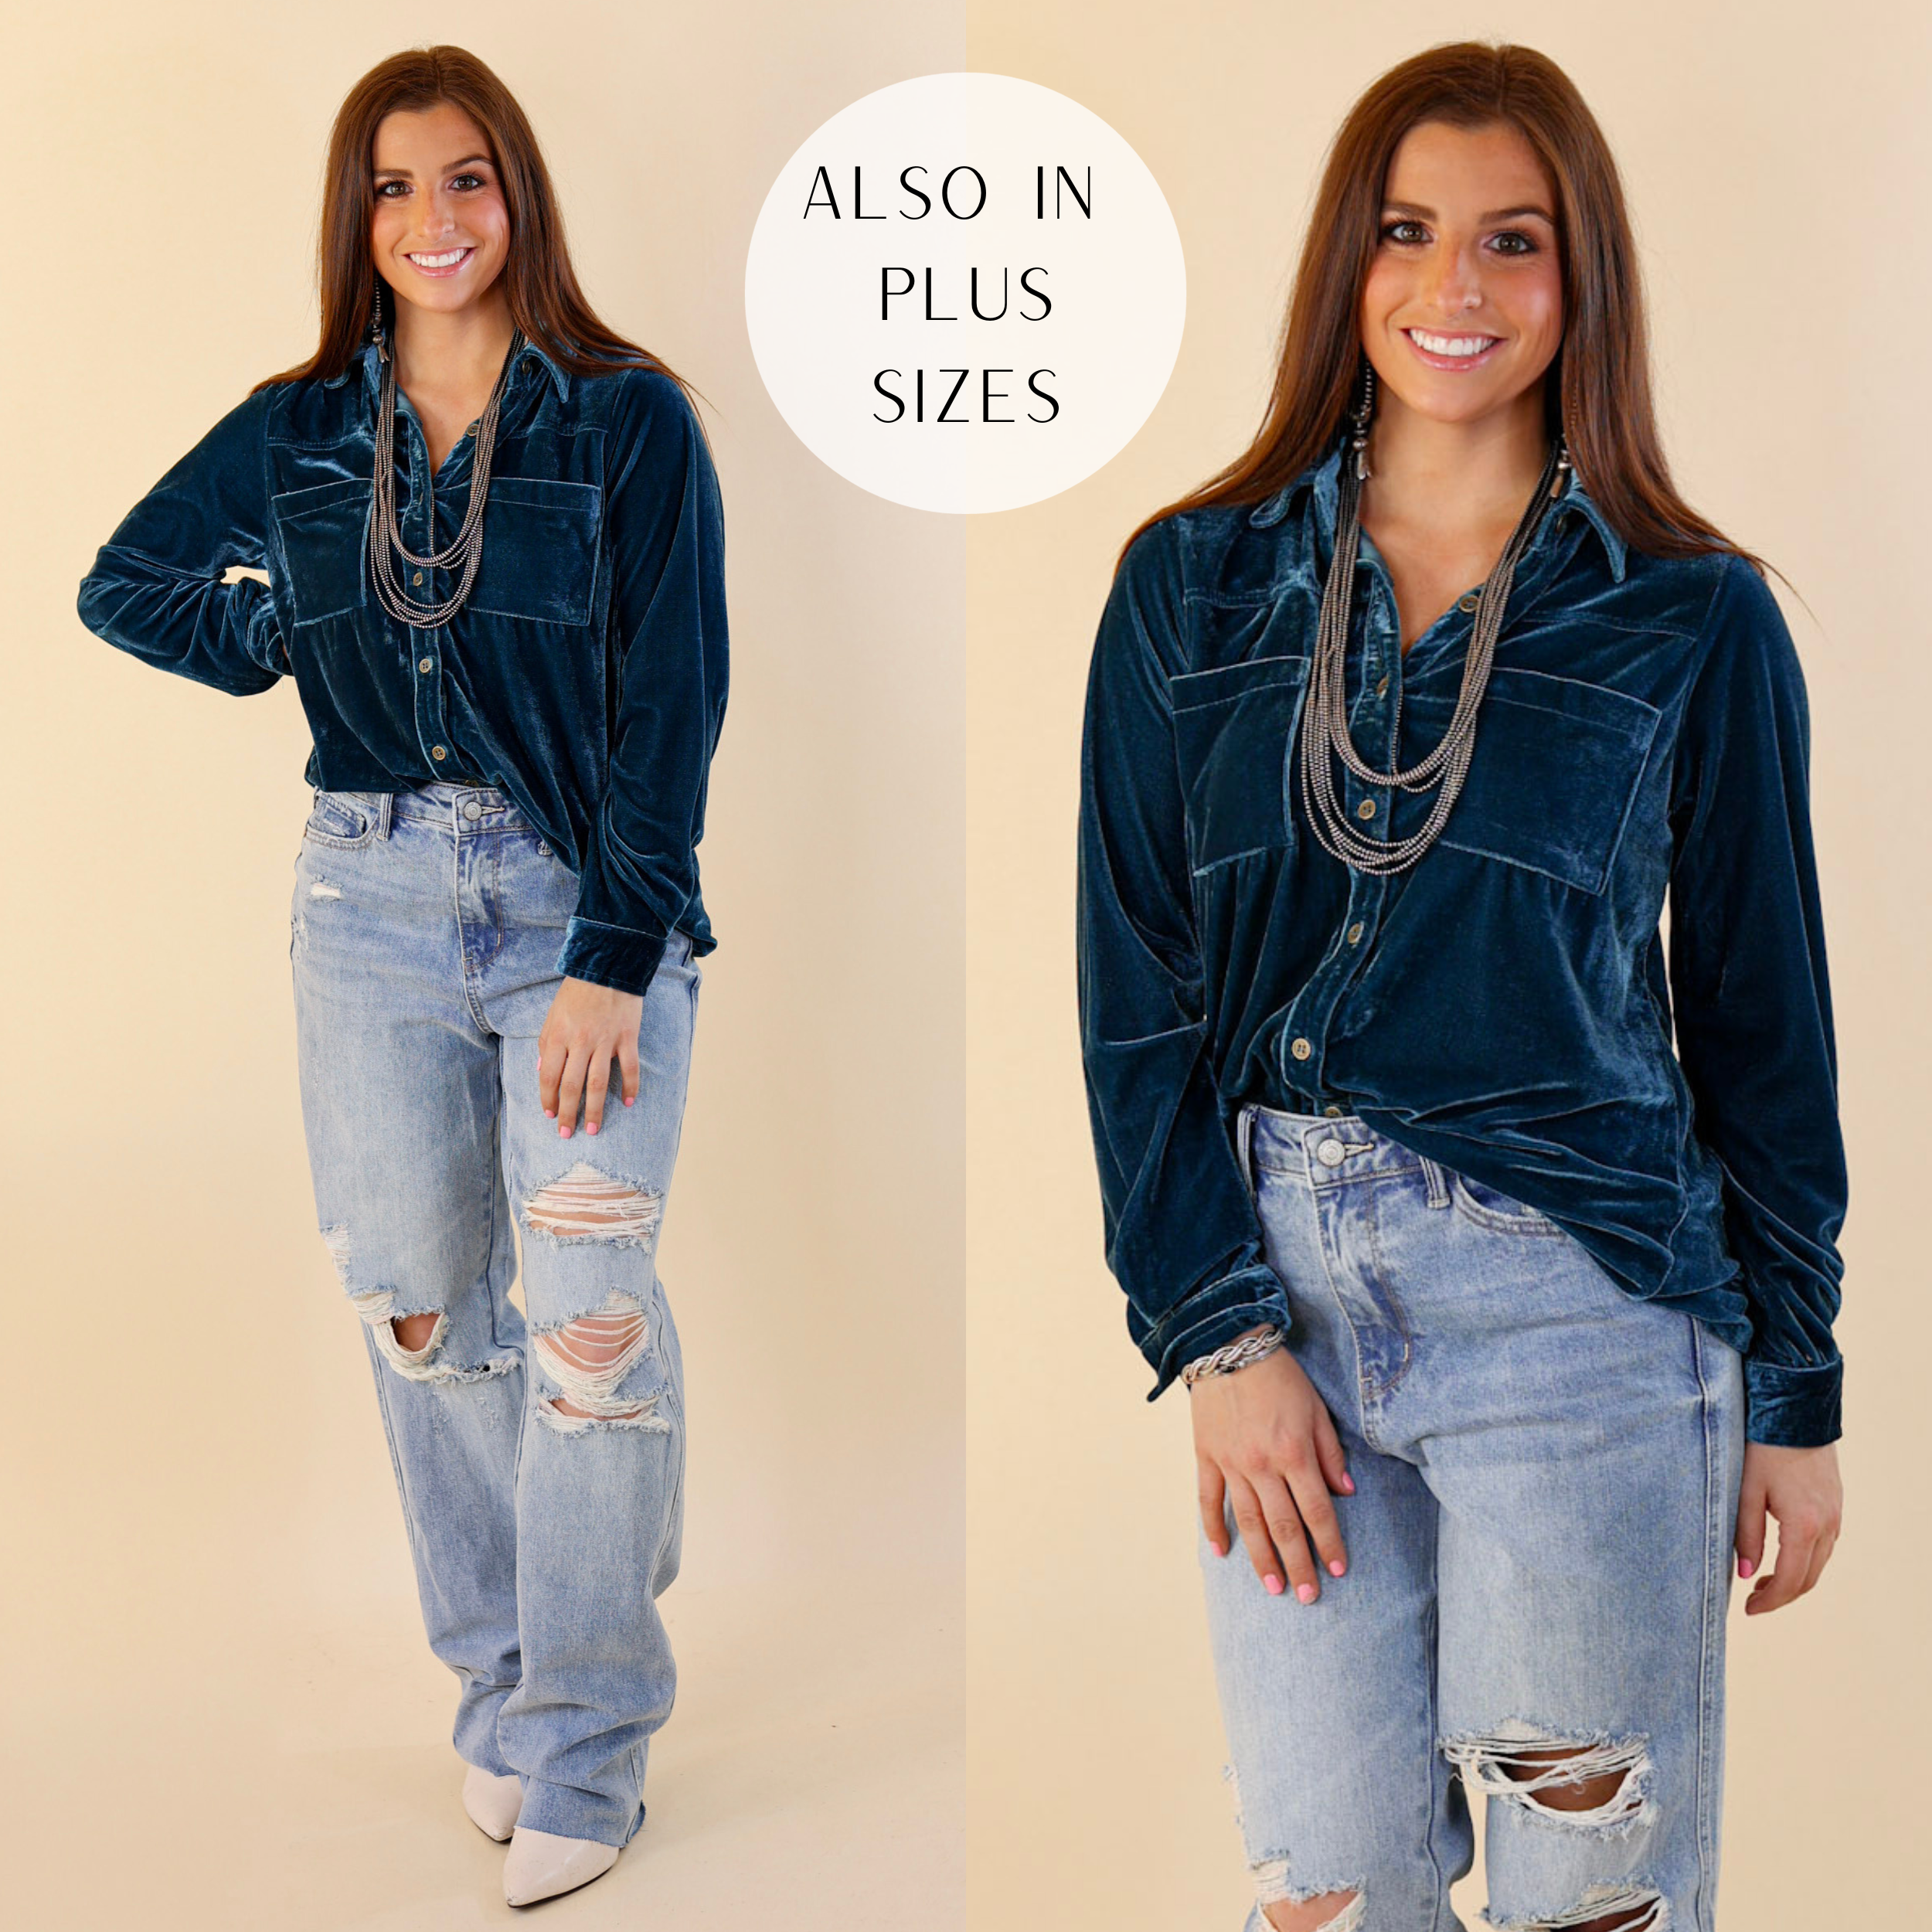 Model is wearing teal blue velvet top and paired it with light washed jeans and silver jewelry.